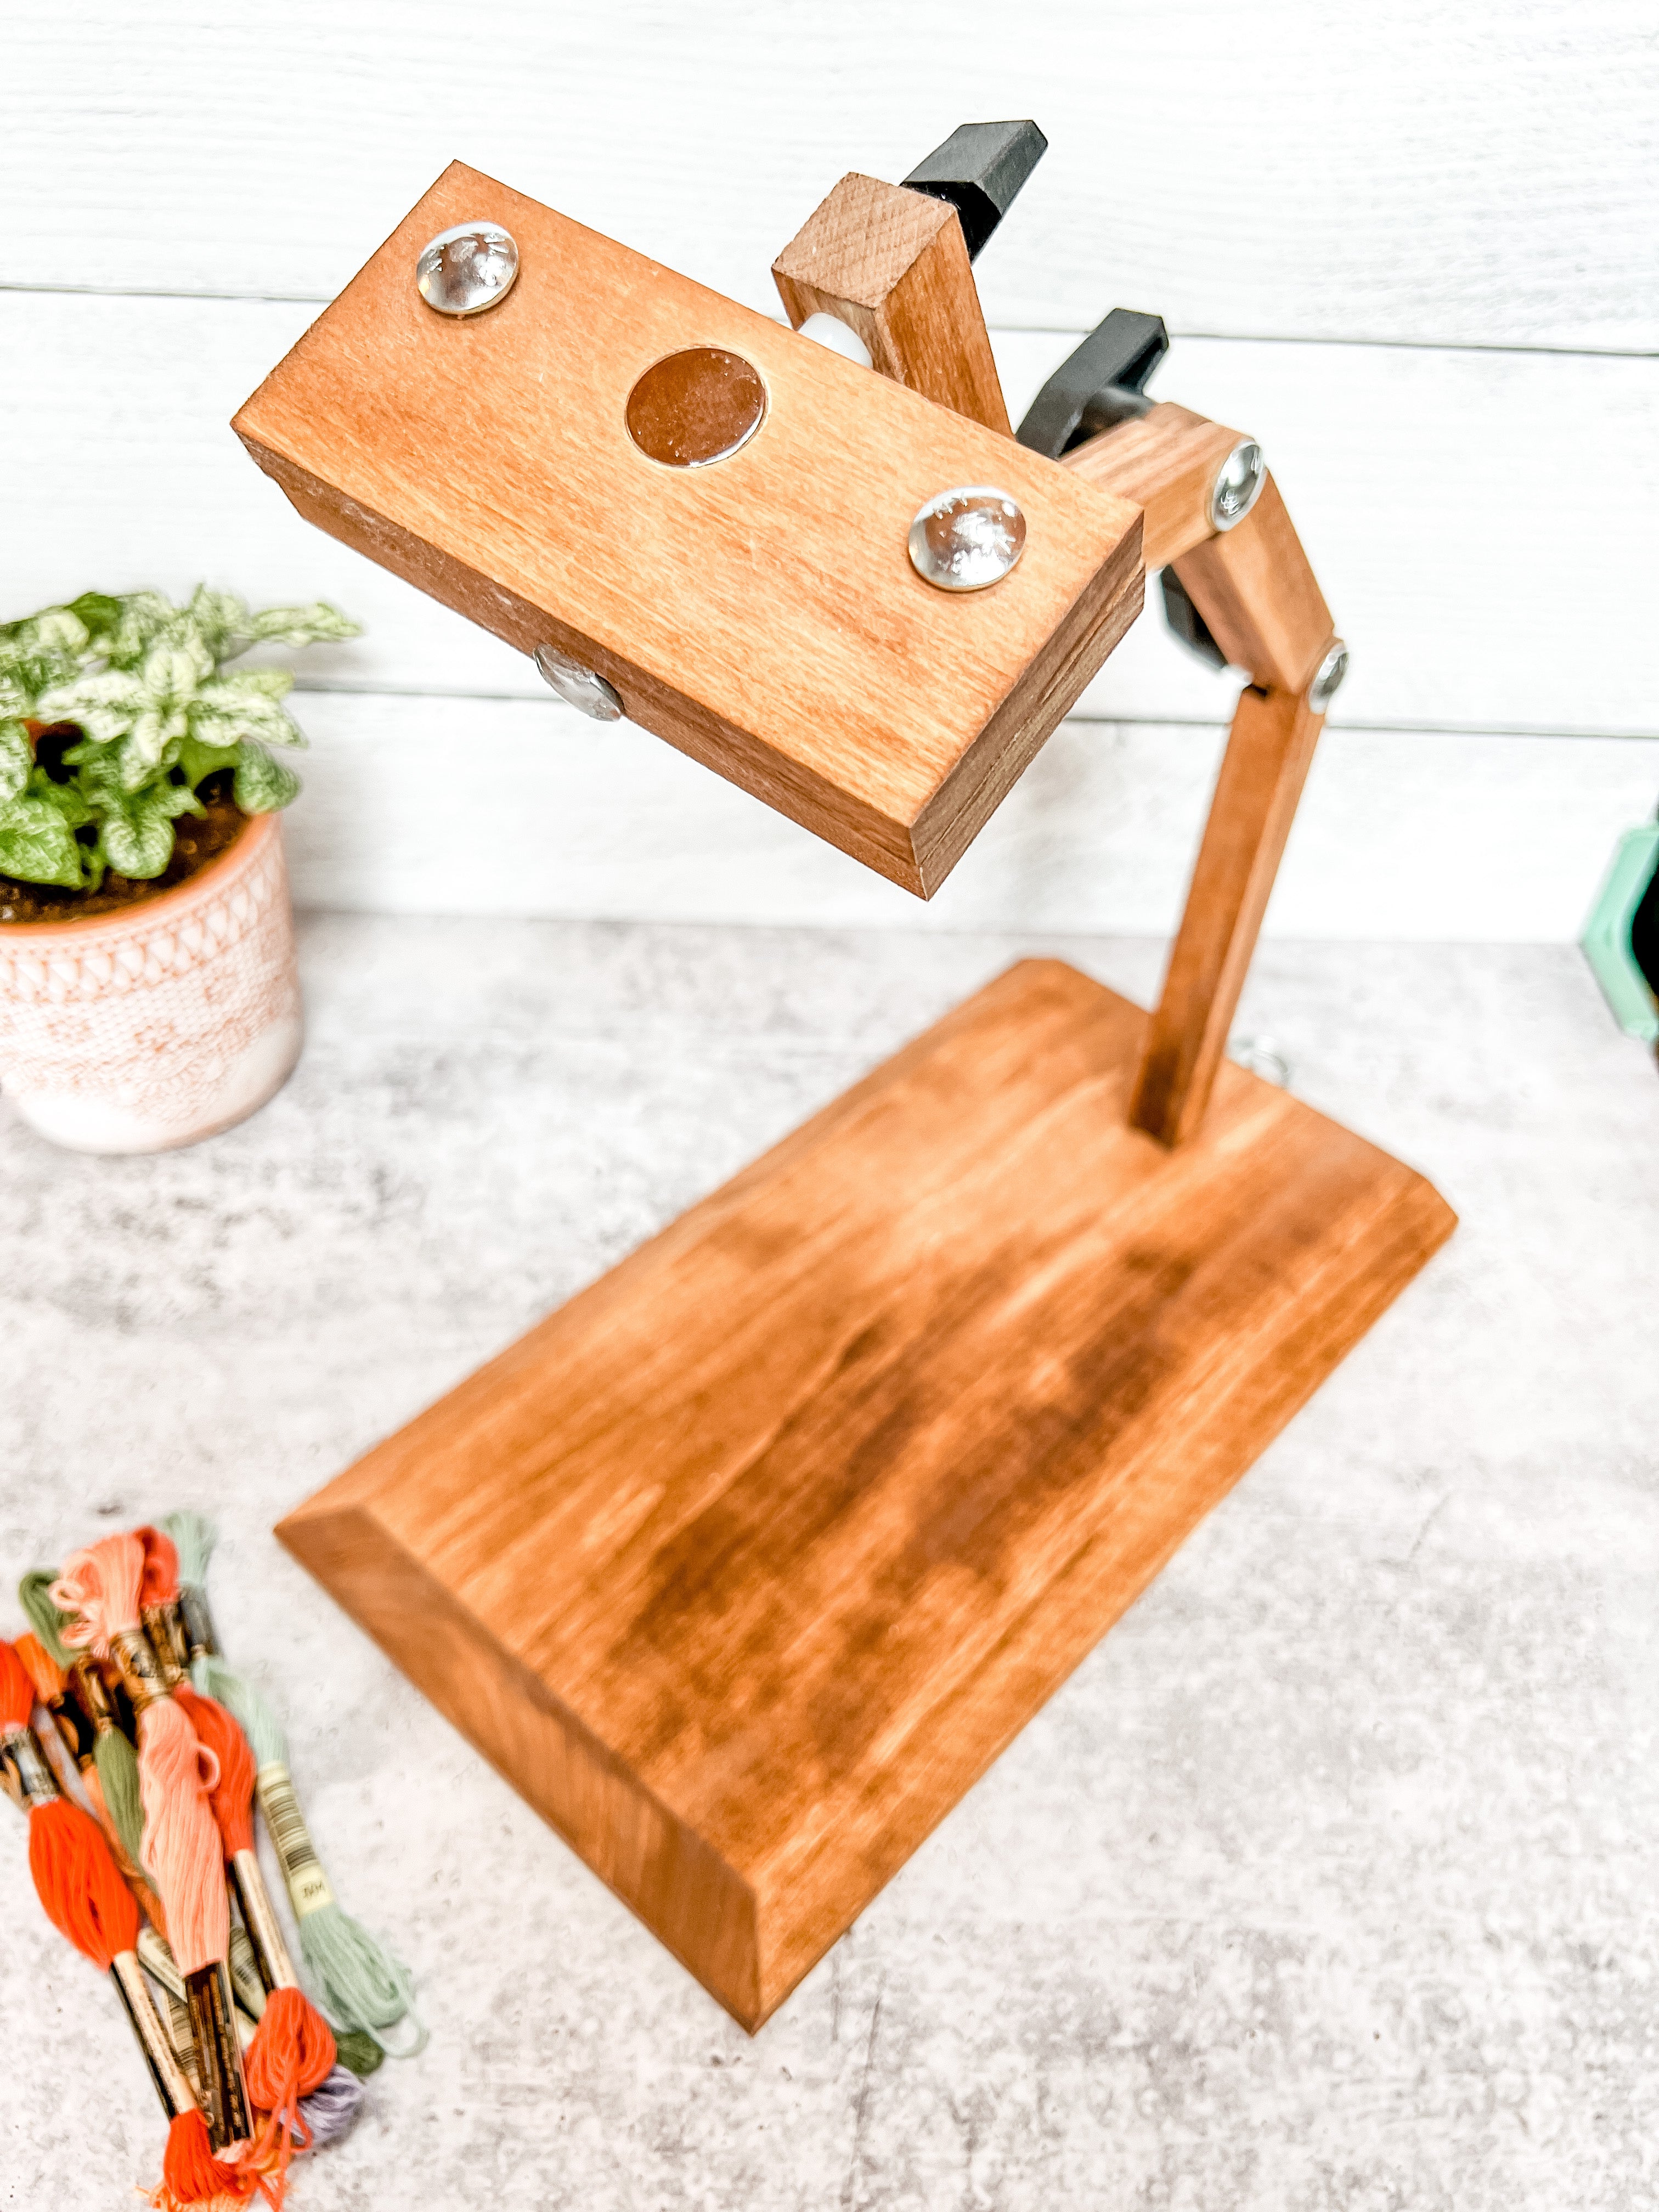 Adjustable Wooden Embroidery Stand